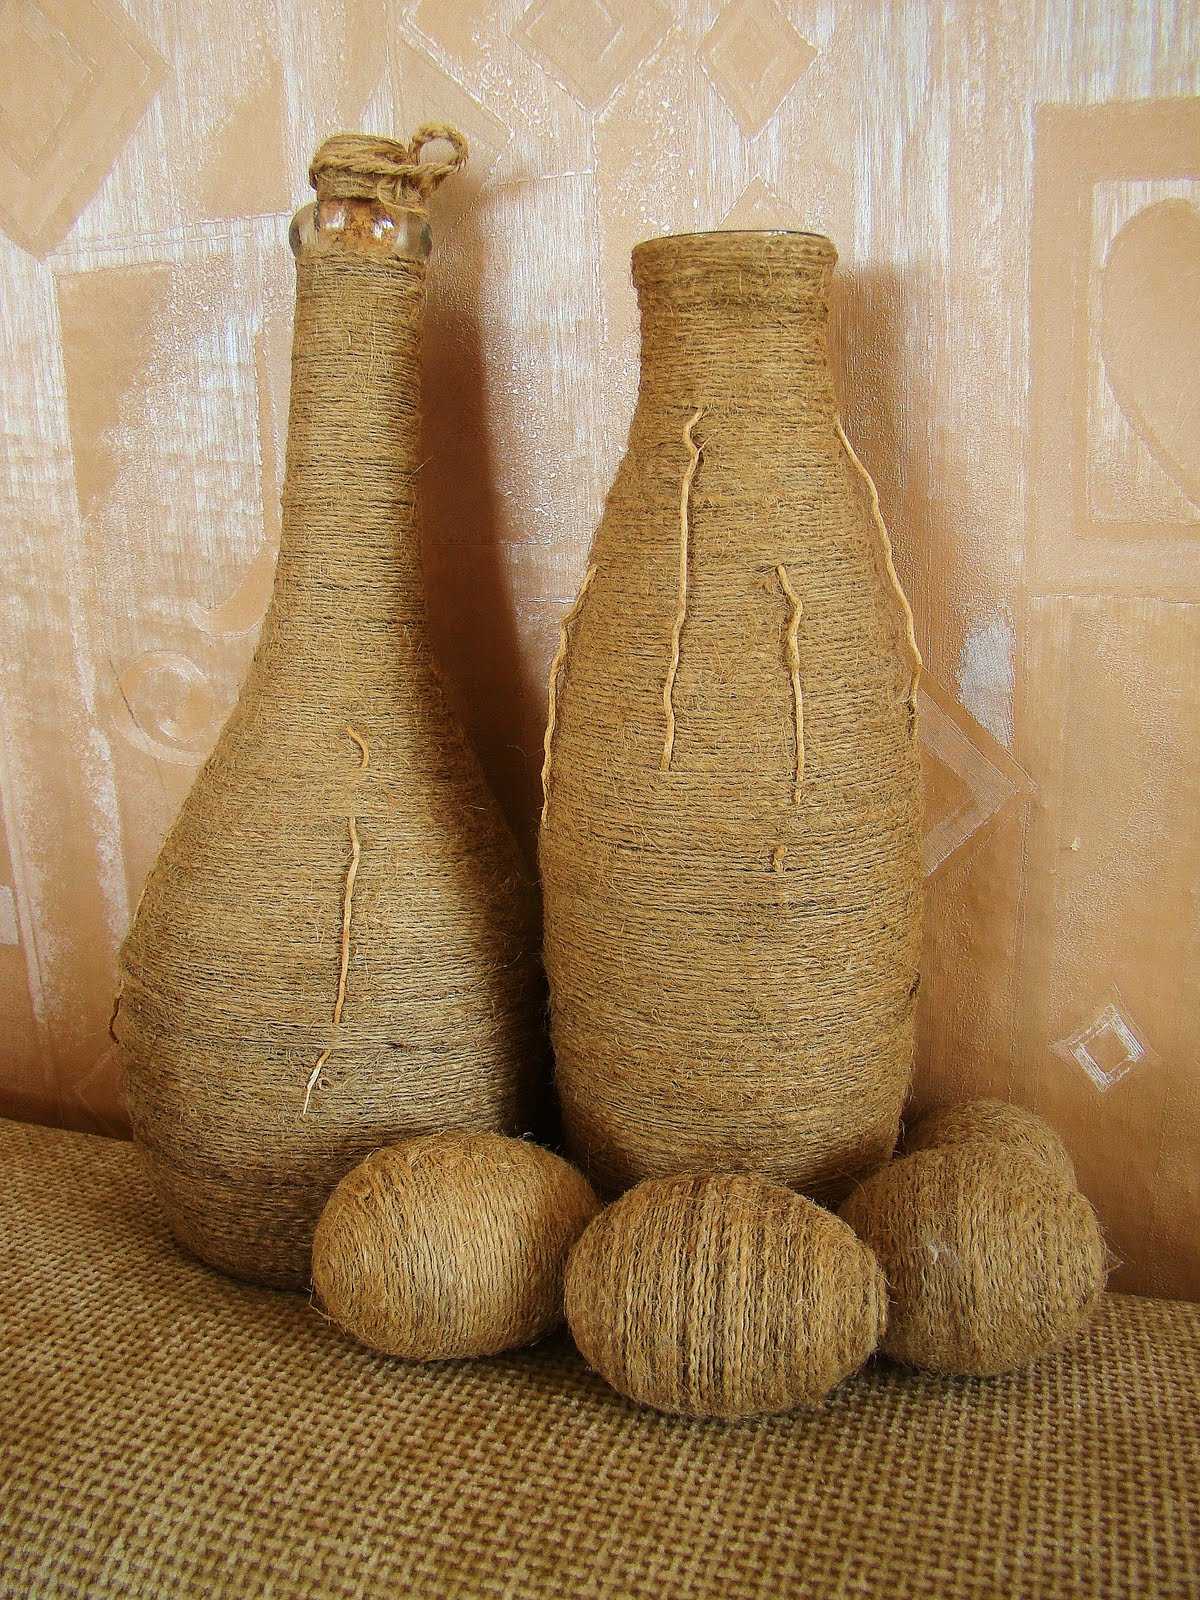 version of the chic design of champagne bottles with twine